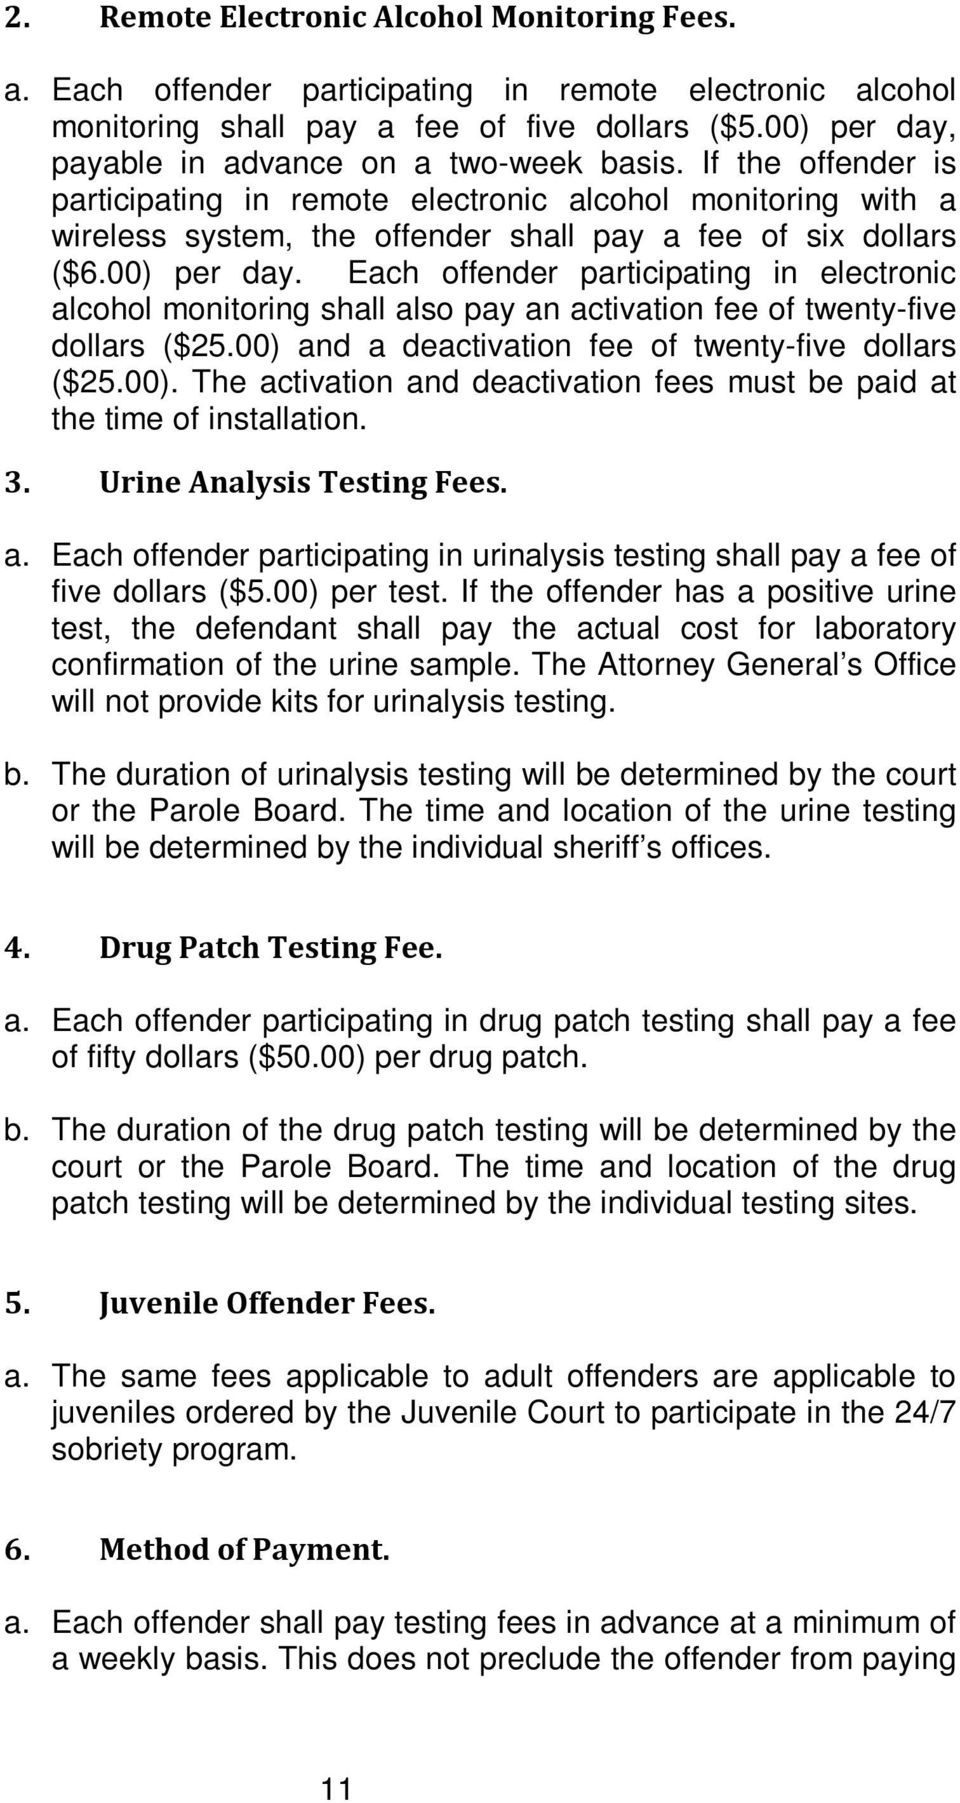 00) per day. Each offender participating in electronic alcohol monitoring shall also pay an activation fee of twenty-five dollars ($25.00) and a deactivation fee of twenty-five dollars ($25.00). The activation and deactivation fees must be paid at the time of installation.